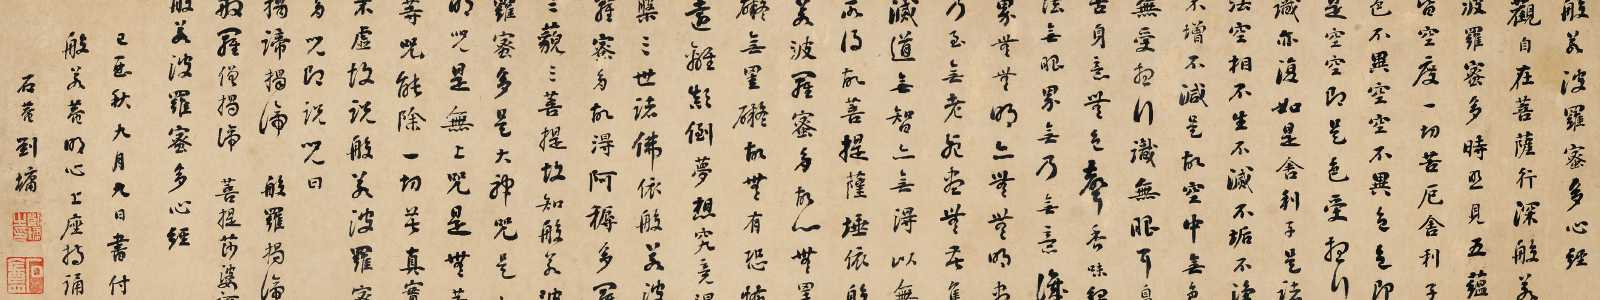 Fine Chinese Classical Paintings and Calligraphy